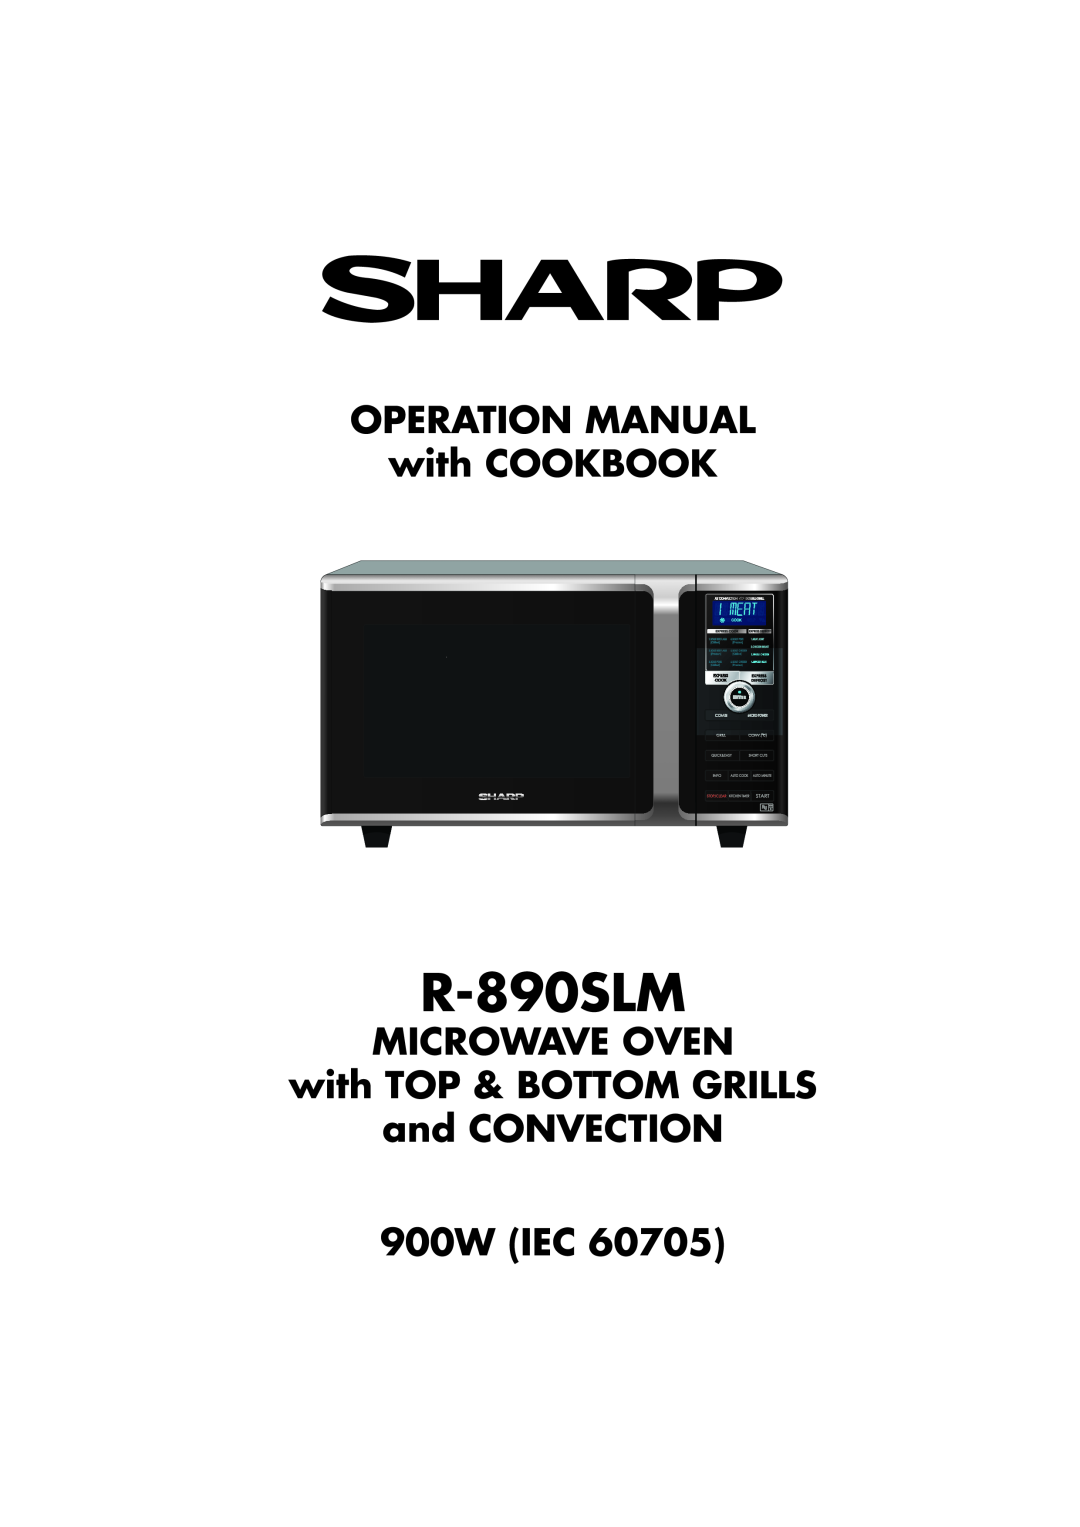 Sharp quick start R-890SLM QUICK START GUIDE, Installation, Getting Started, If You Require Assistance, Microwaving 